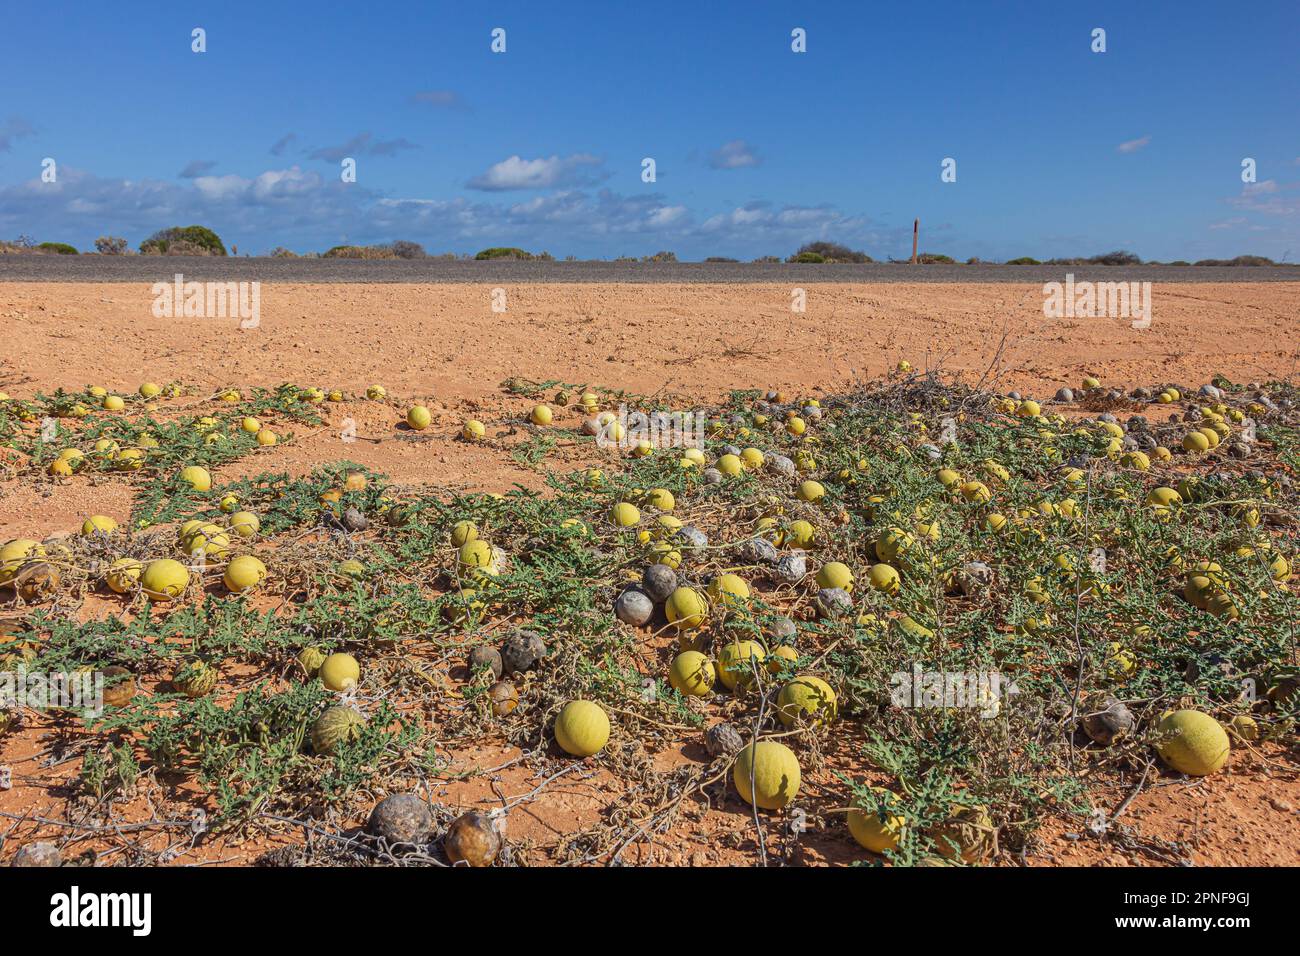 The Australian wild melons (Citrullus lanatus) or also known as Afghan melon or camel melon grows wild in the dessert of Western Australian, Australia. Stock Photo